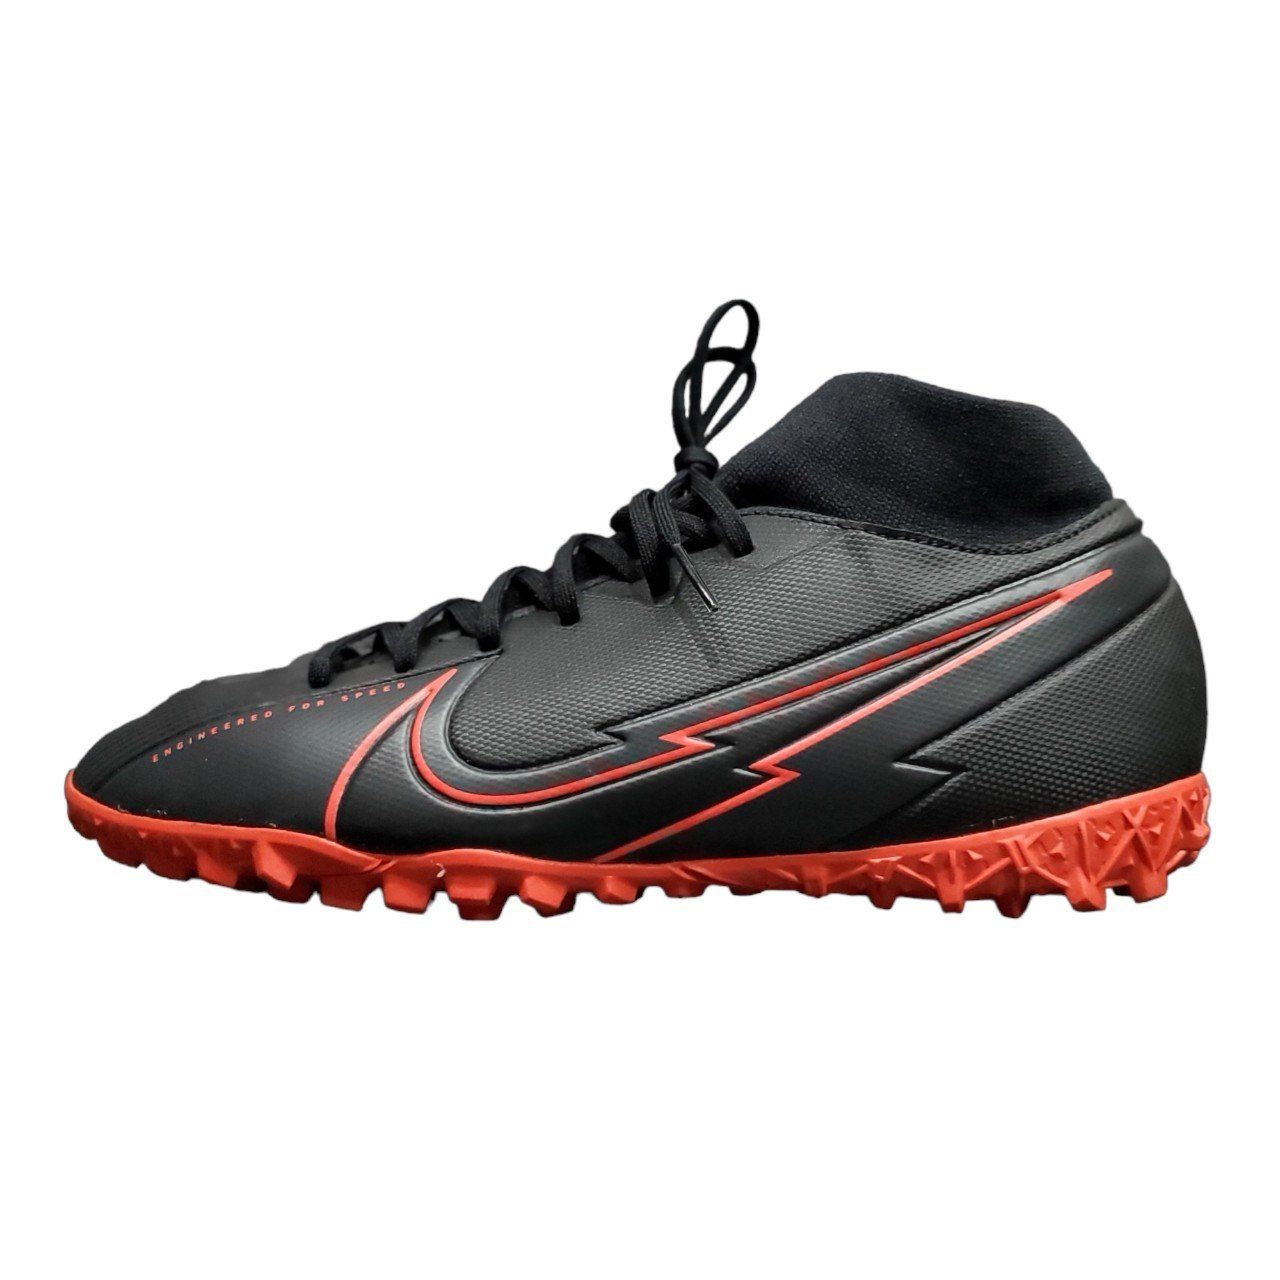  AT7978 060 - NIKE MERCURIAL SUPERFLY 7 ACADEMY TF 